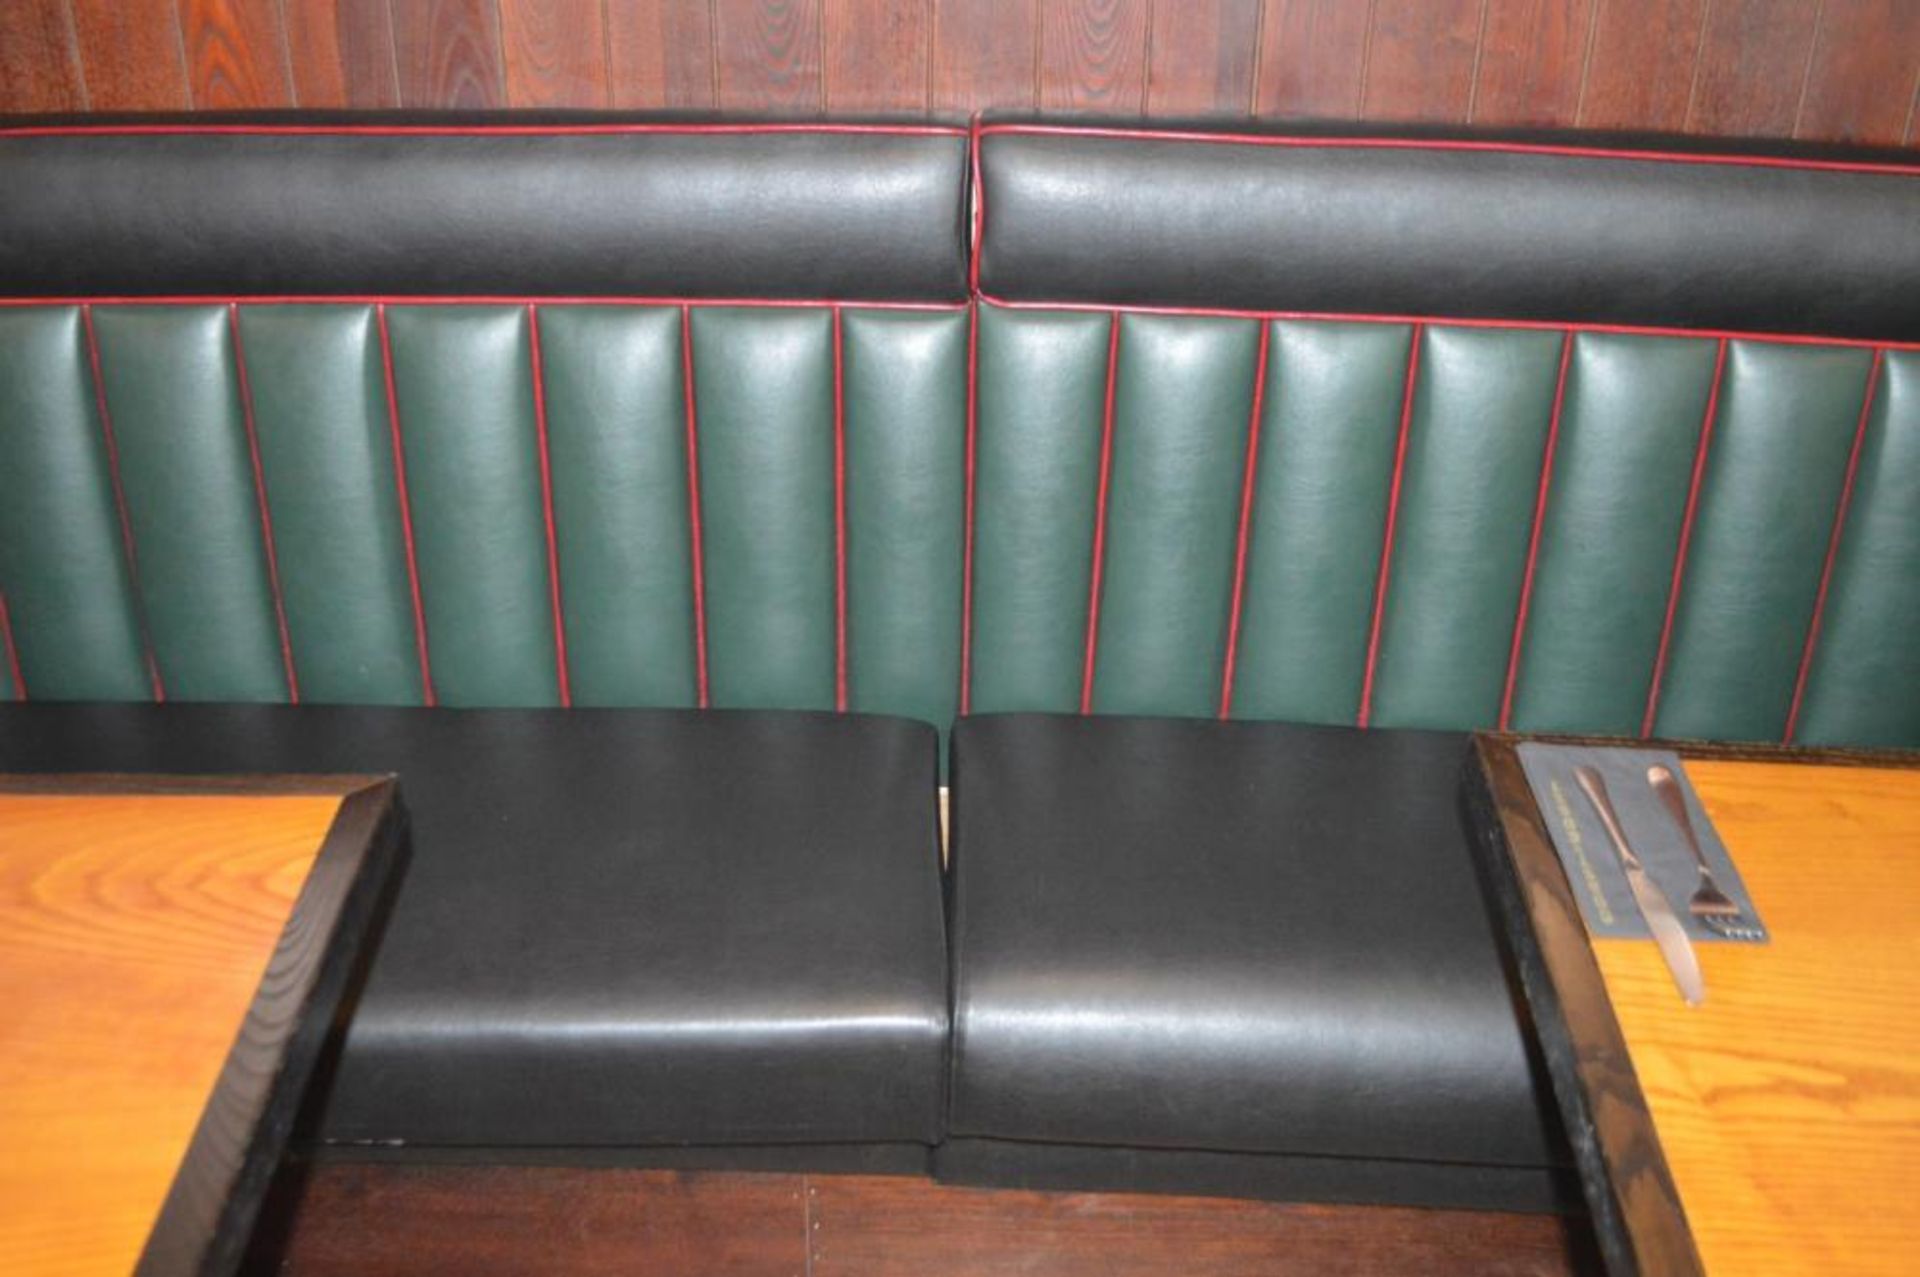 1 x Long Banquet Seating Bench - Features a Leather Upholstery With Green Backrests, Black Seat - Image 5 of 5